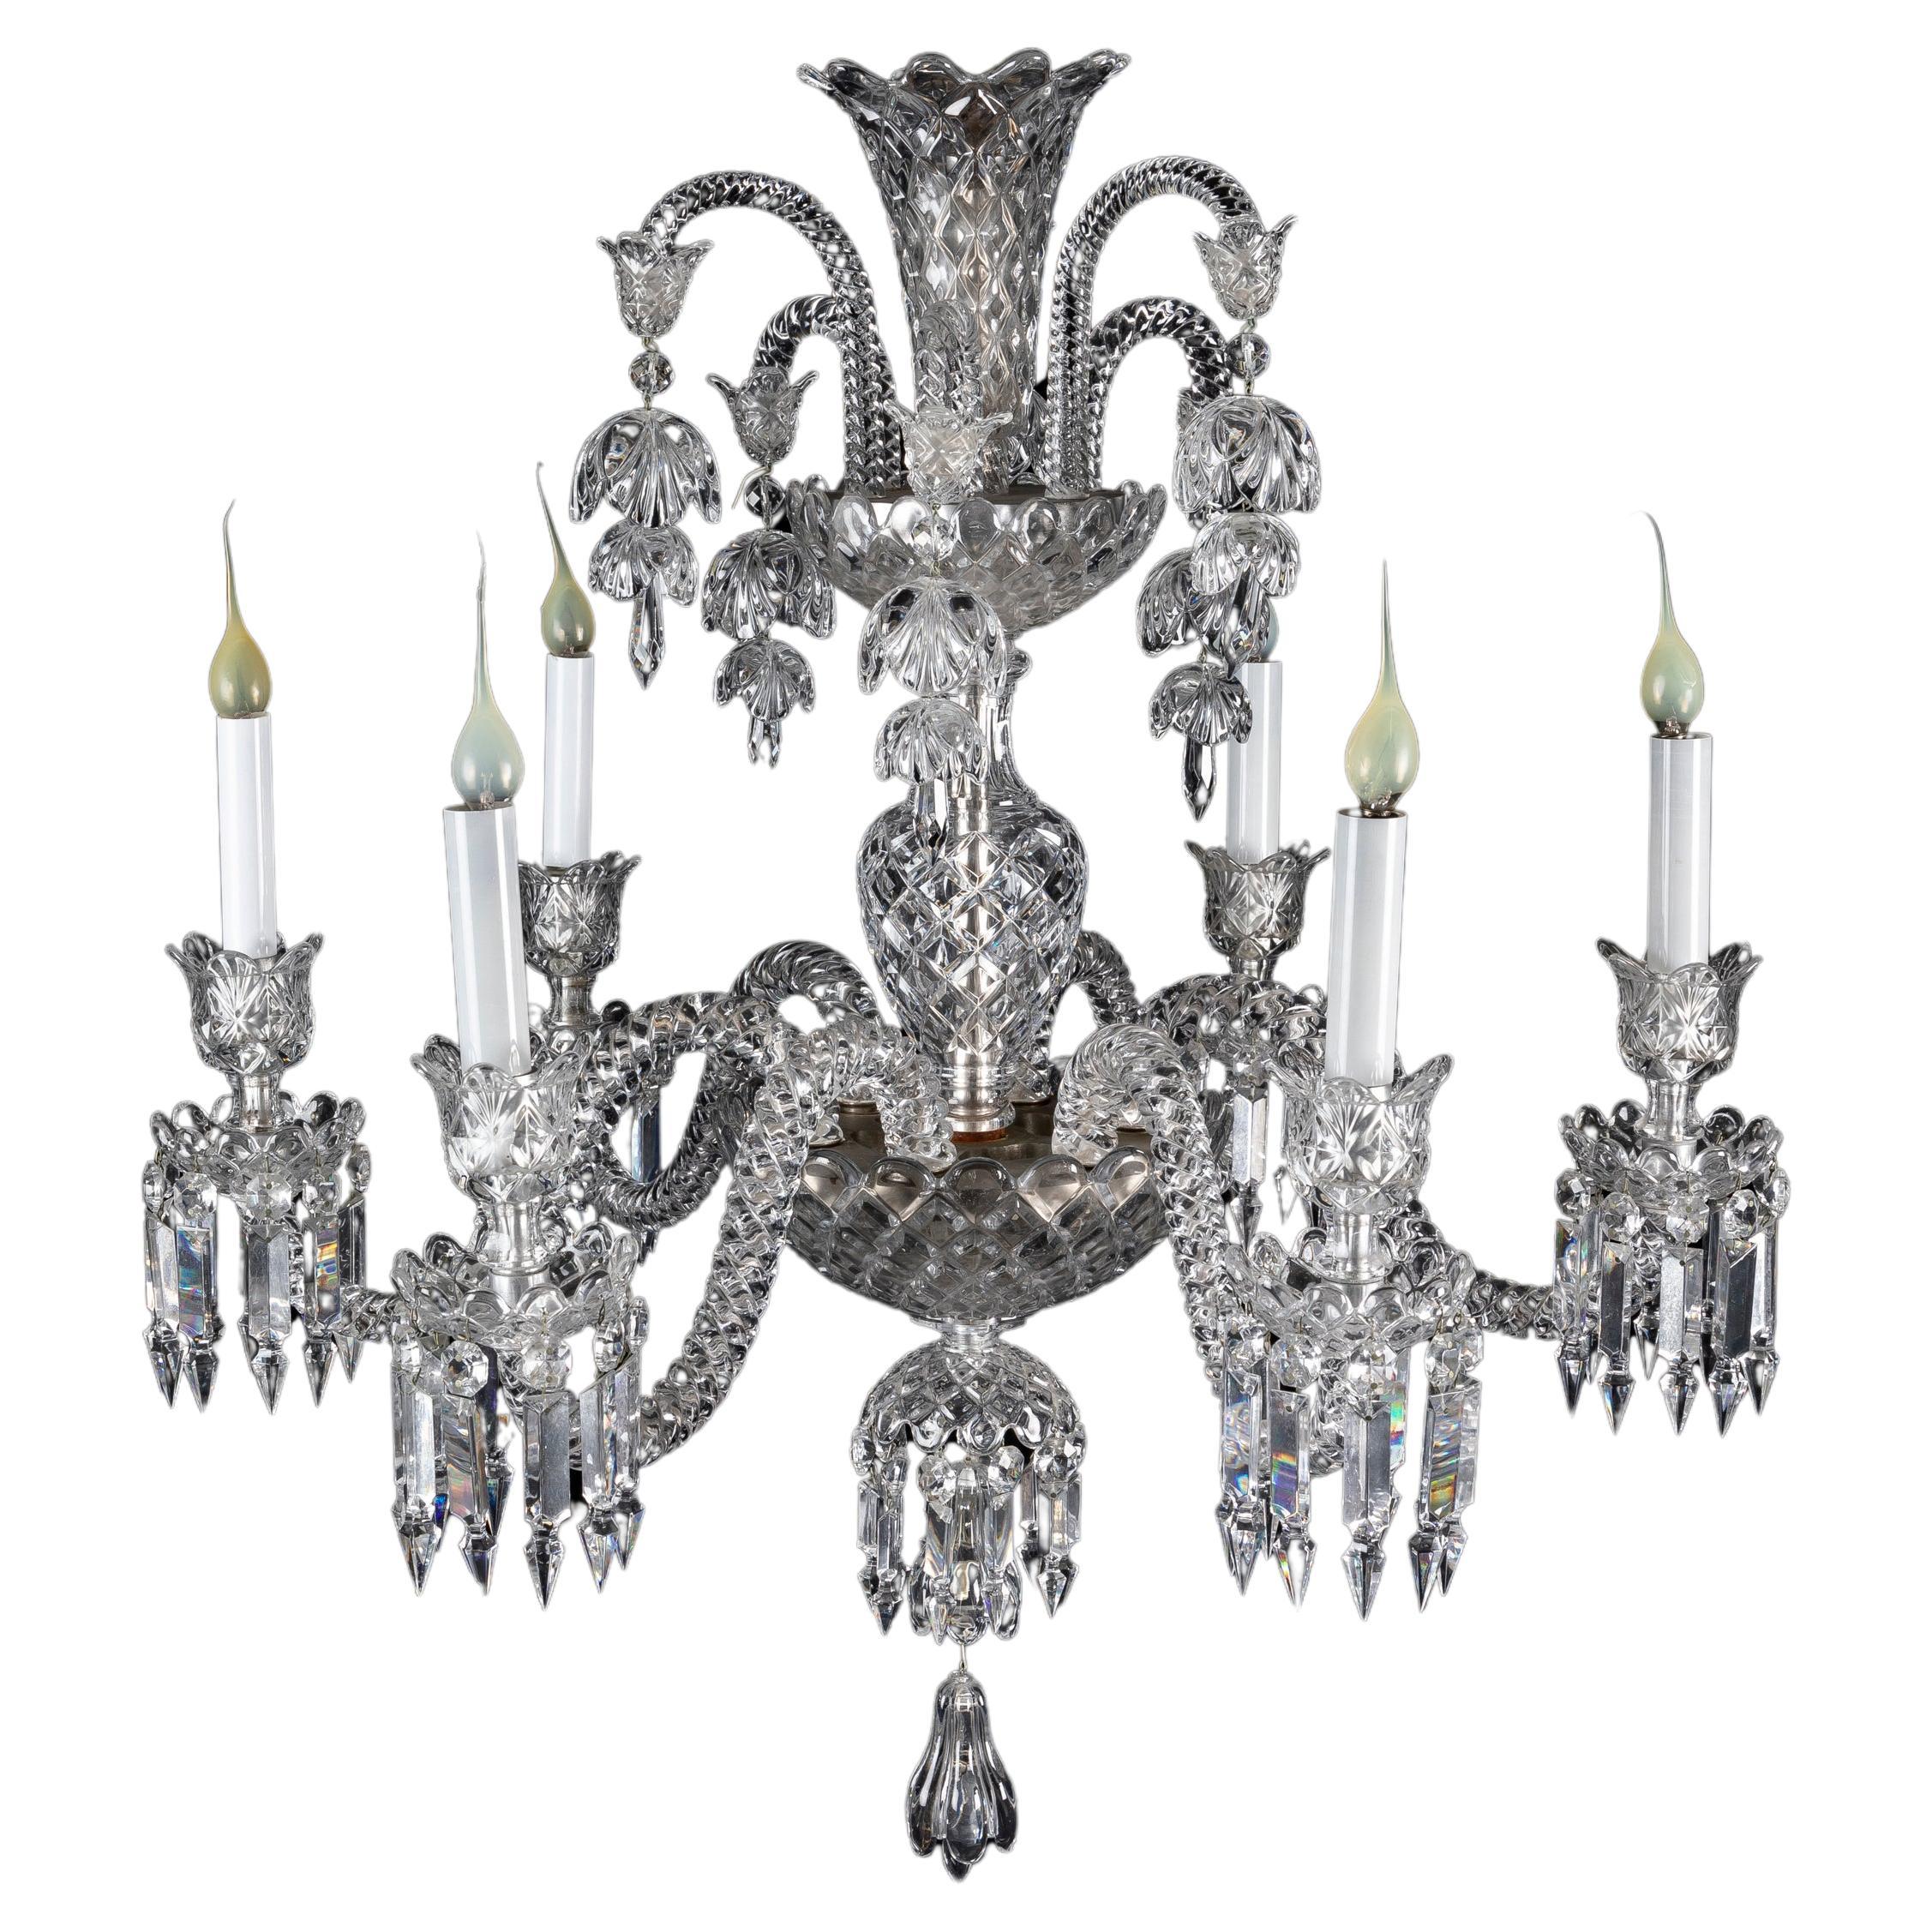 How can I spot an authentic Baccarat chandelier?